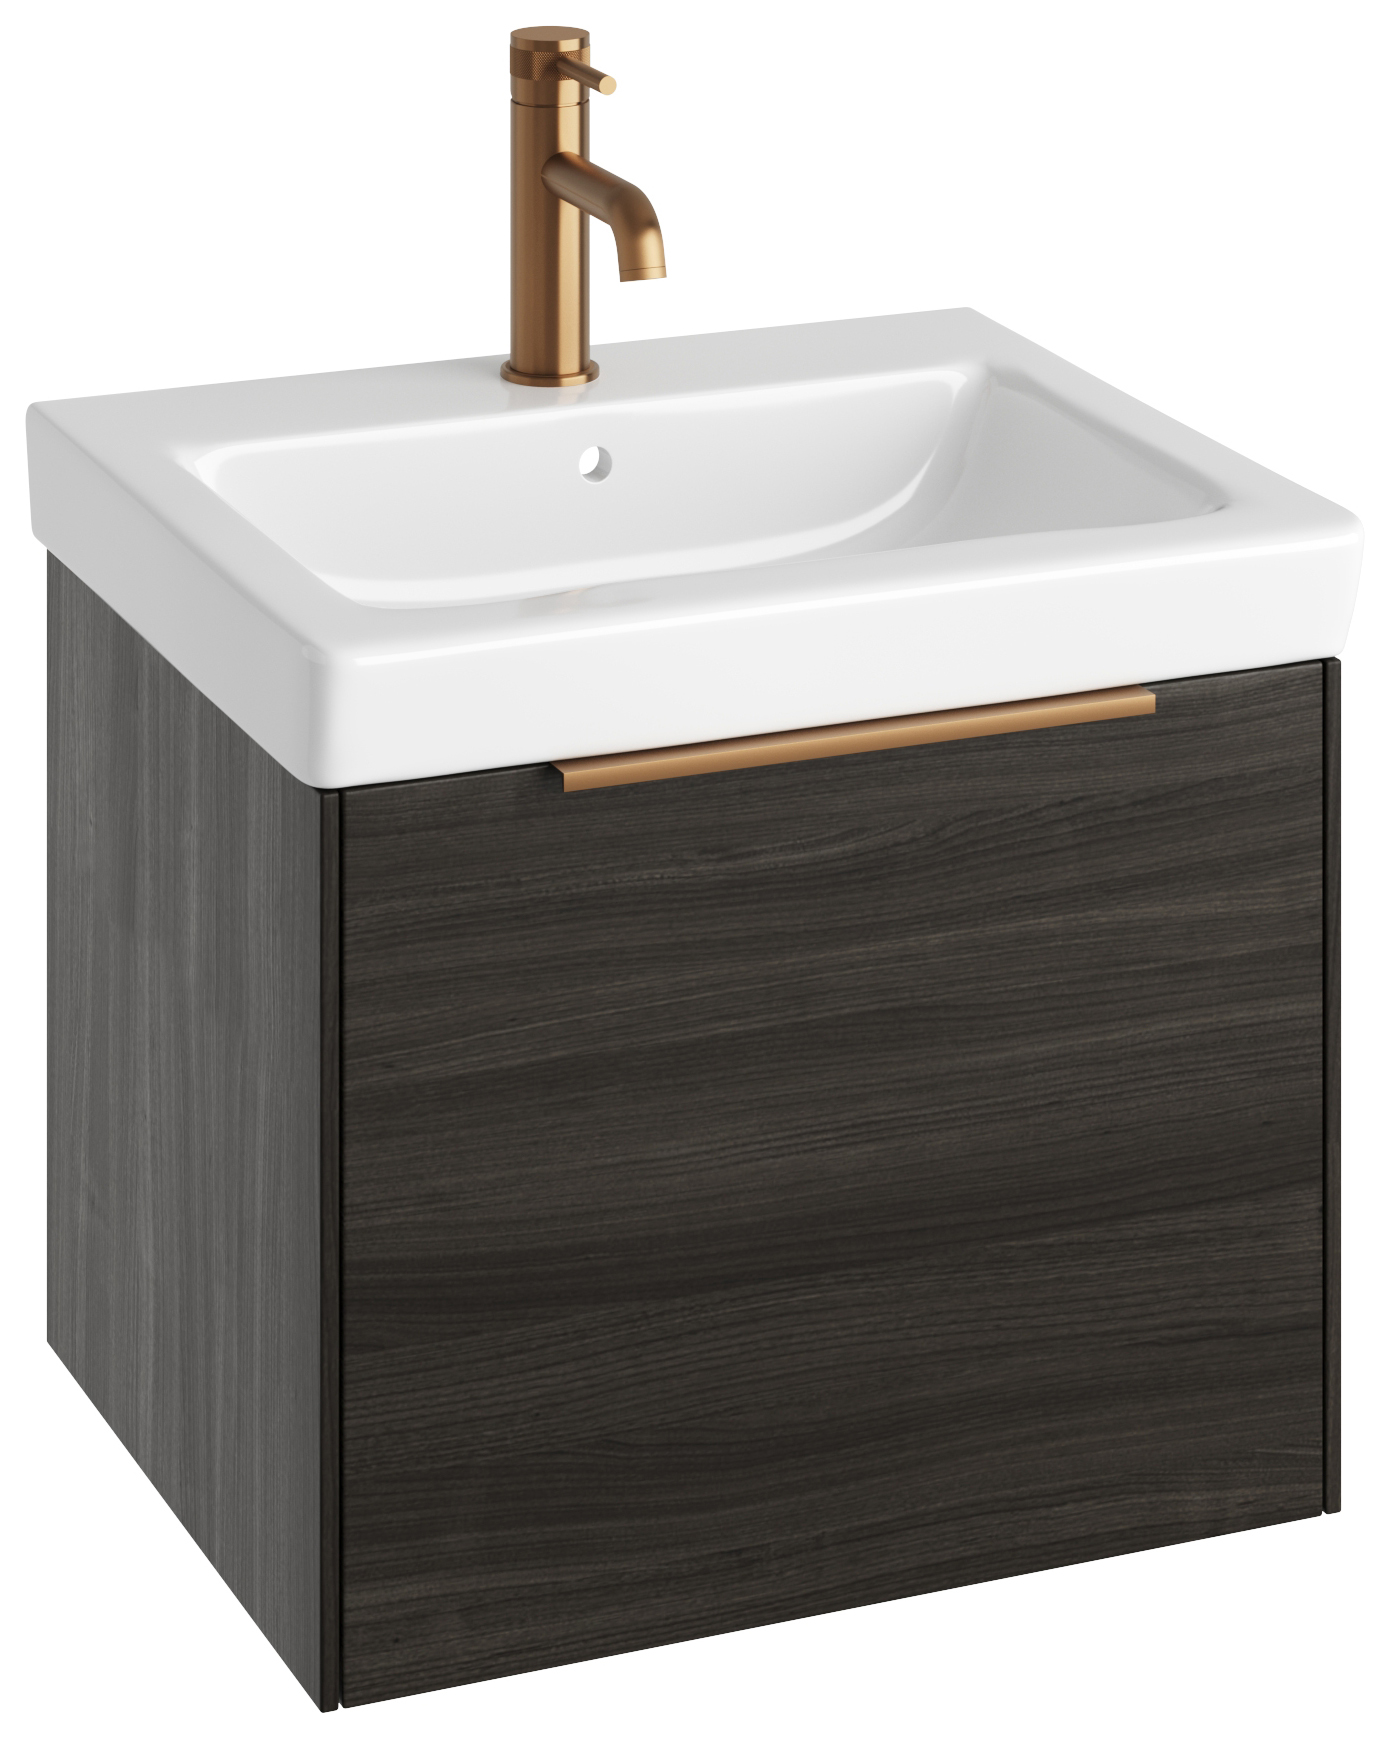 Image of Abacus Concept Lava S3 Vanity Unit & Basin - 550mm